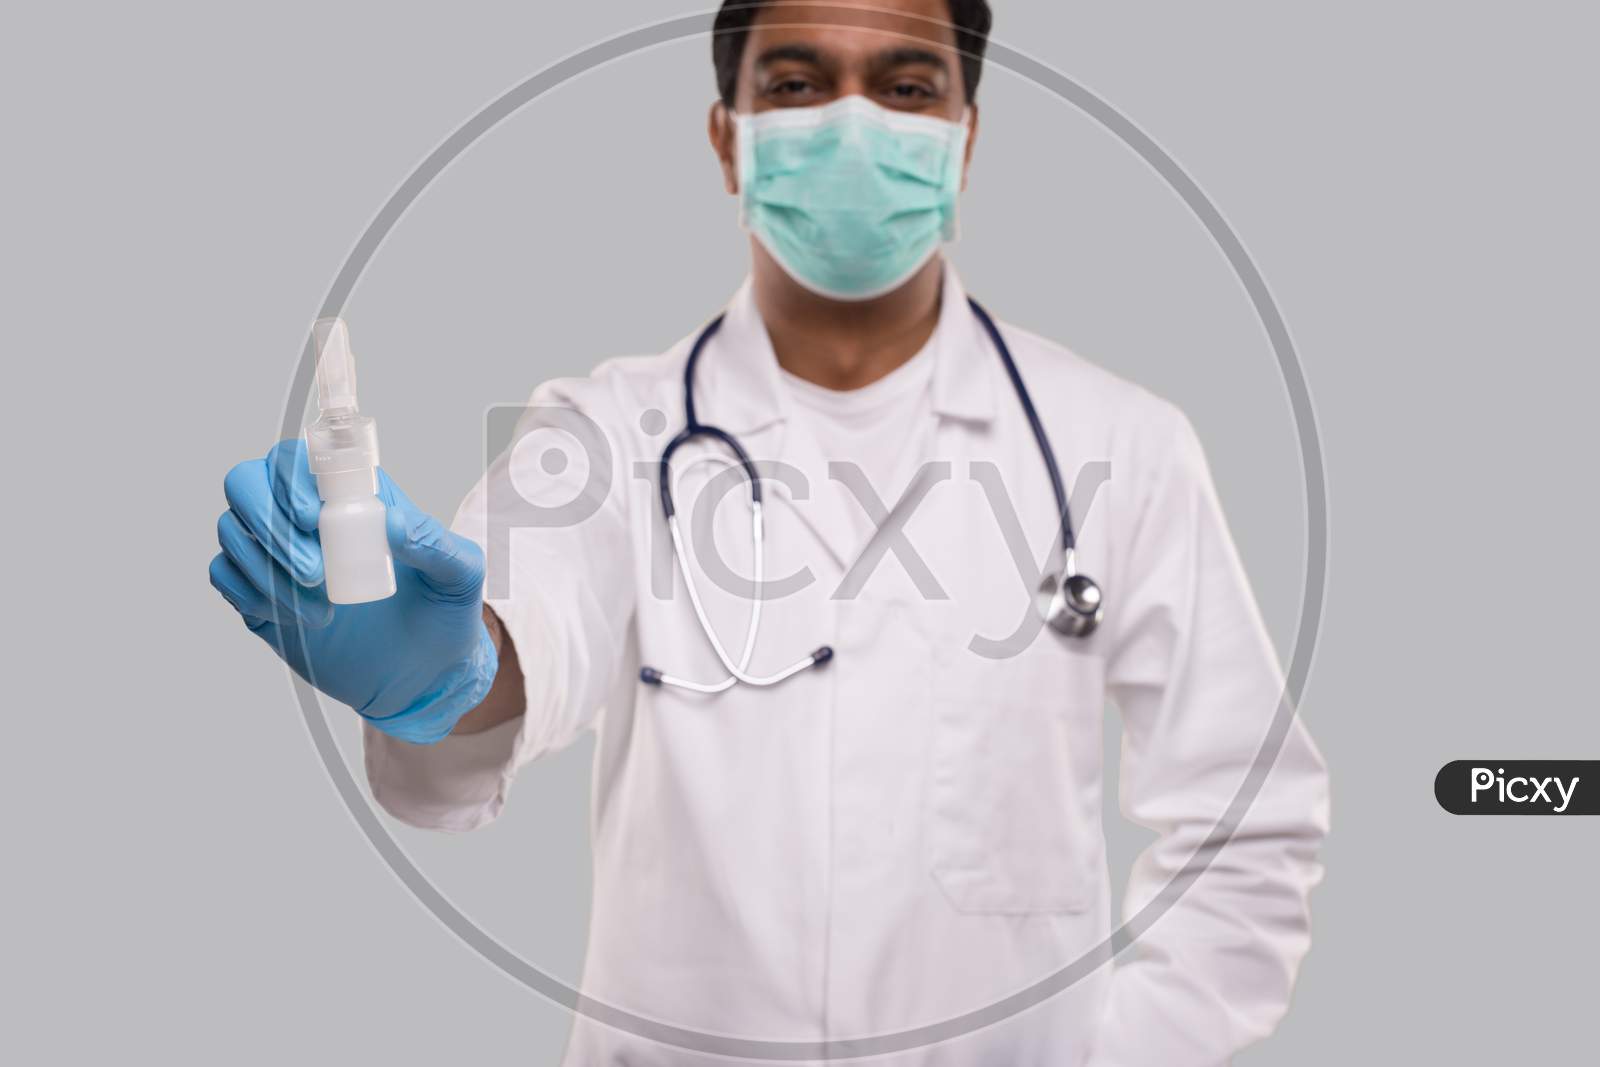 Doctor Showing Nose Spray Wearing Medical Mask And Gloves Close Up. Indian Man Doctor Nasal Spray. Corona Virus Concept. Isolated